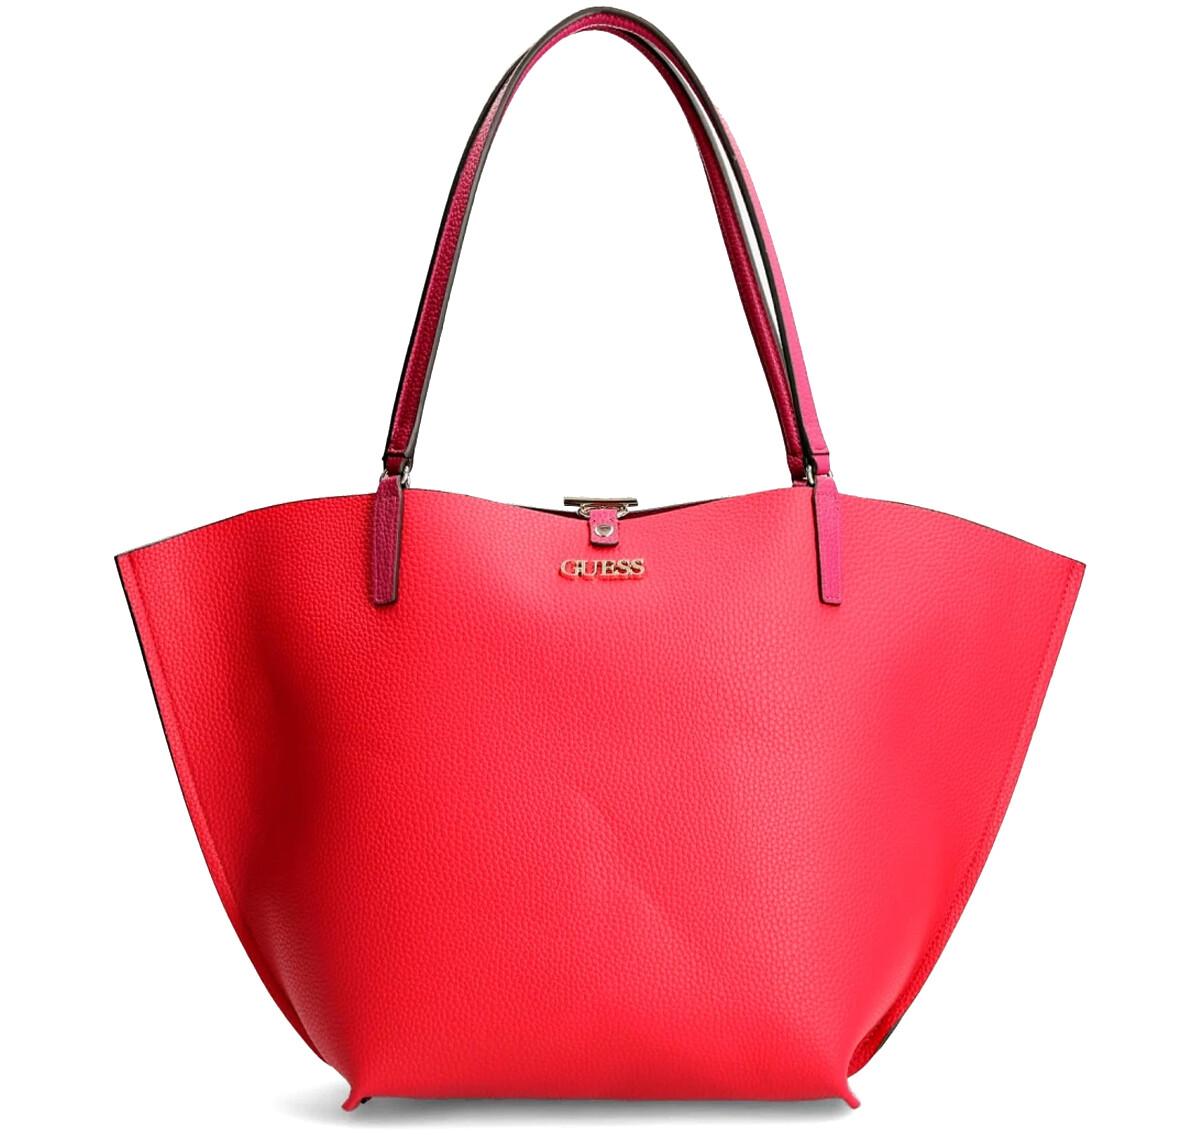 Guess Women's Red Backpack at FORZIERI